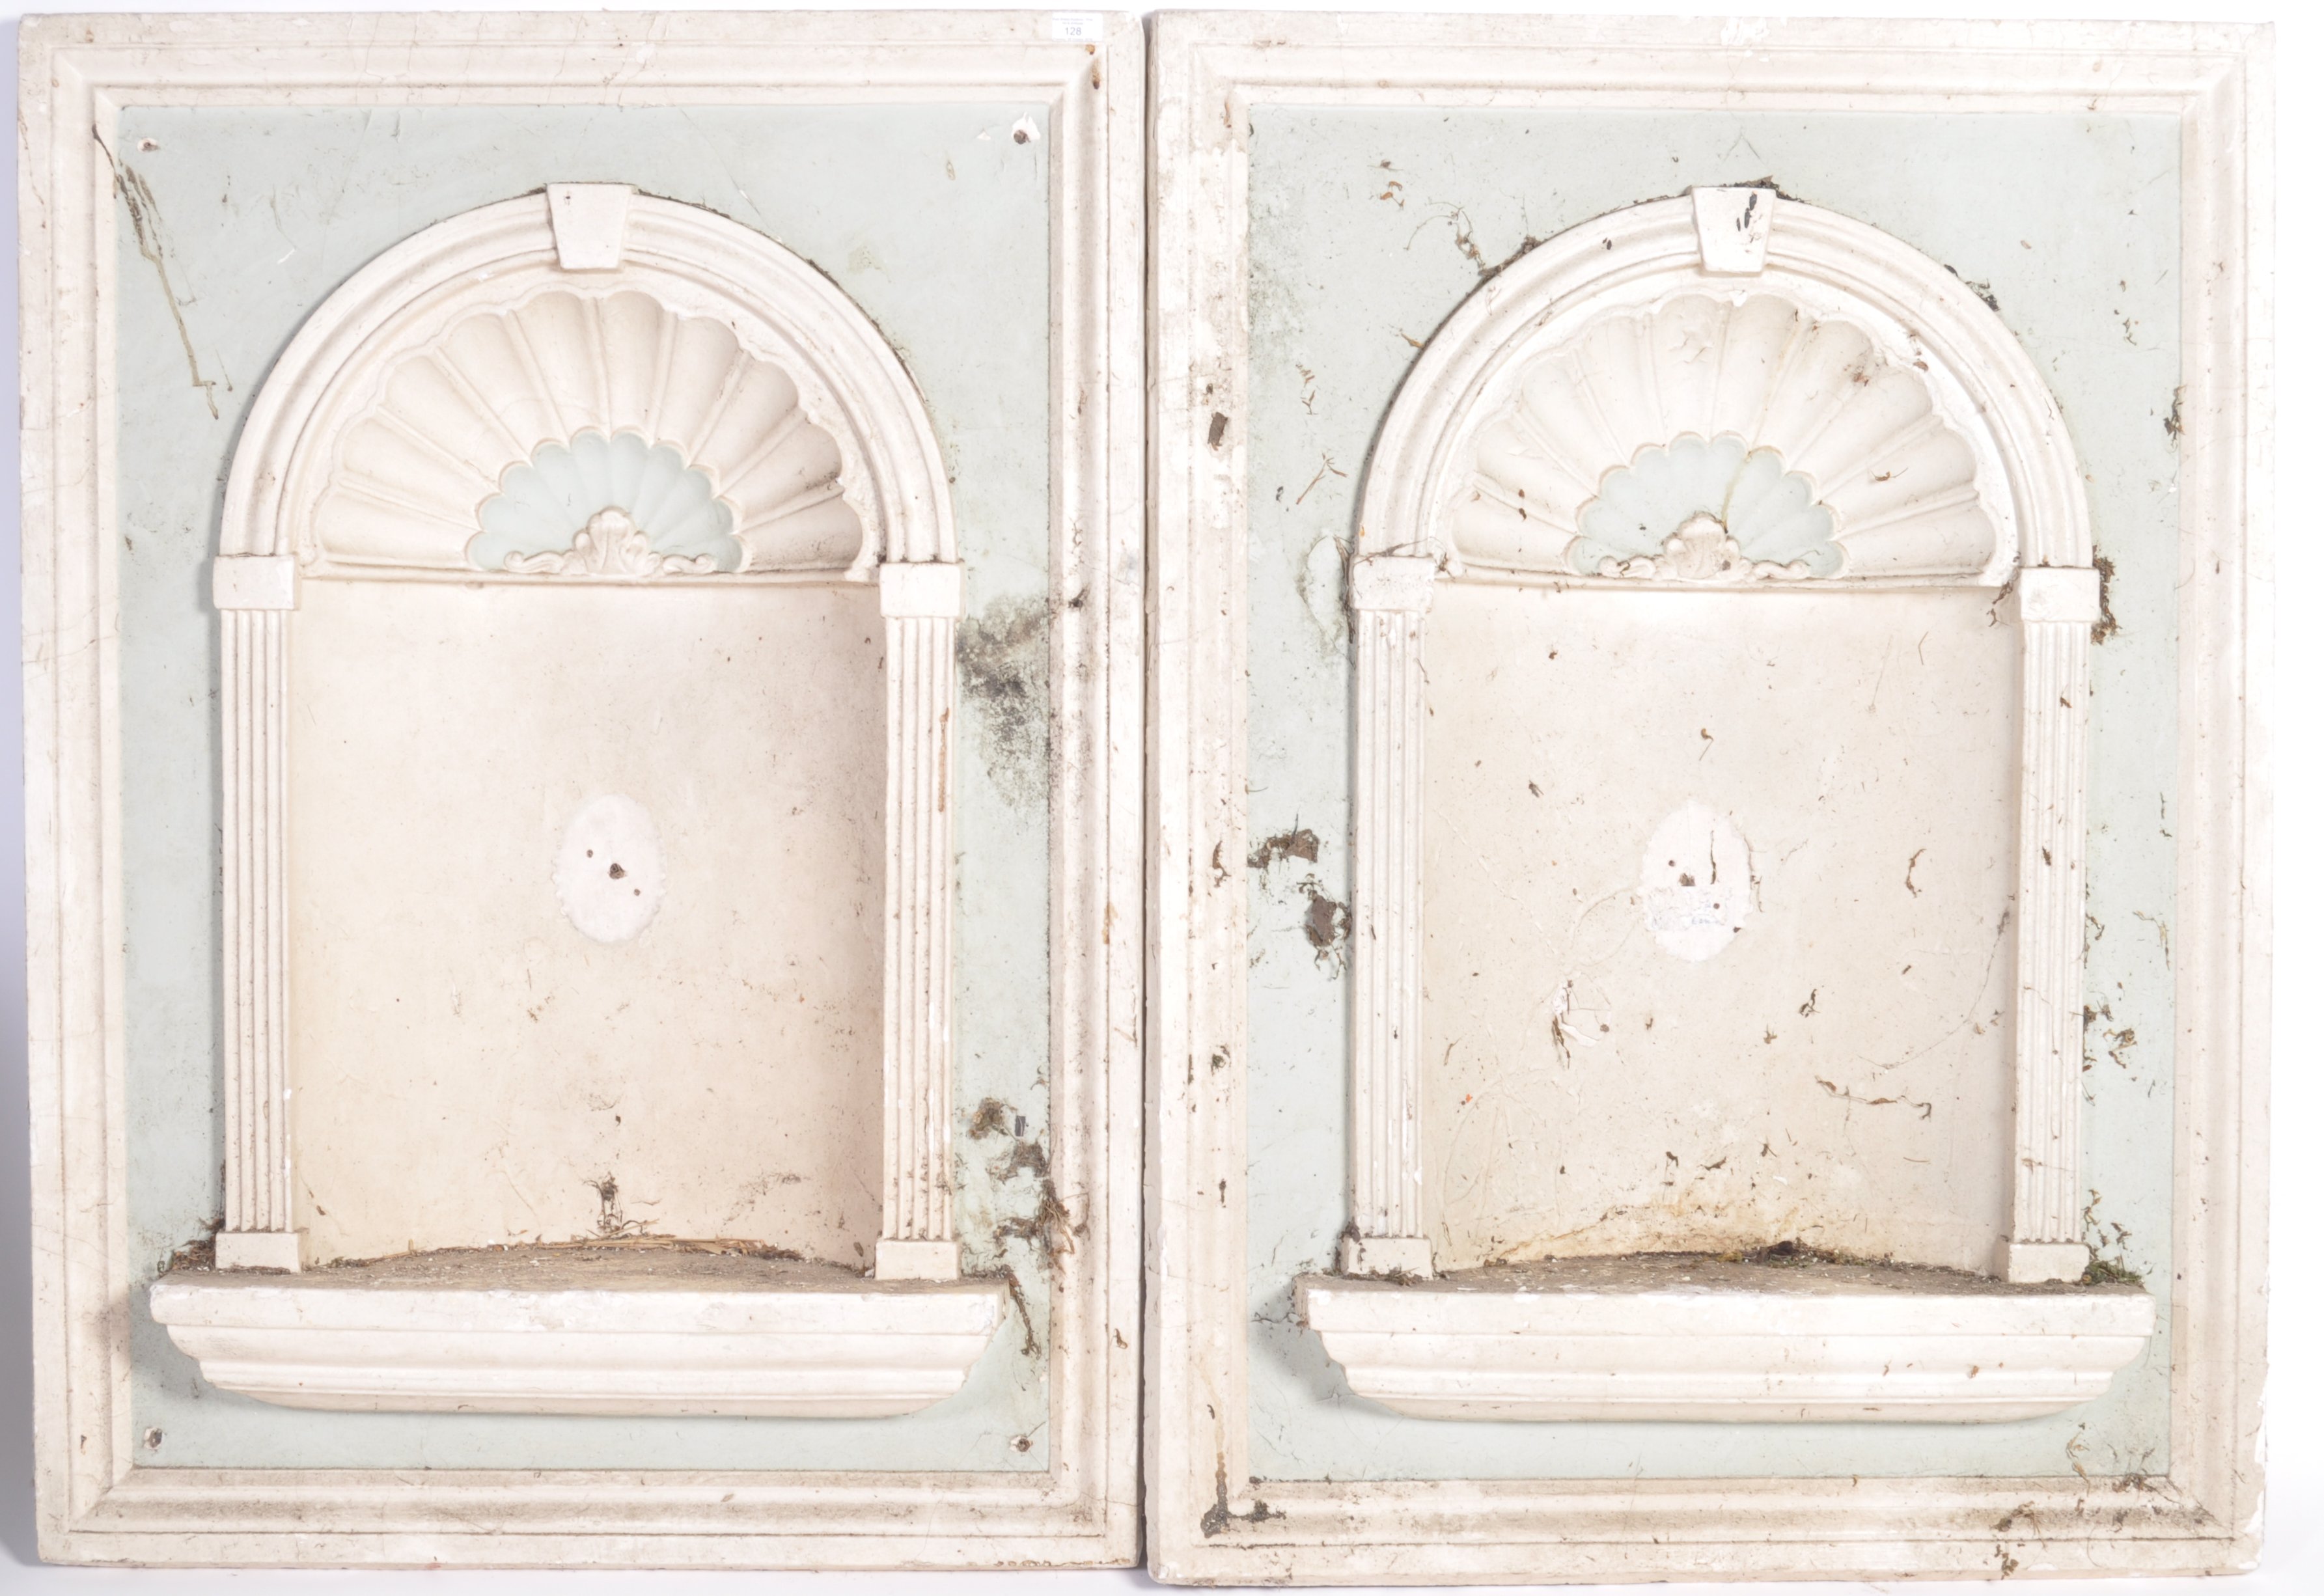 PAIR OF ANTIQUE STYLE CLASSICAL WALL NICHES